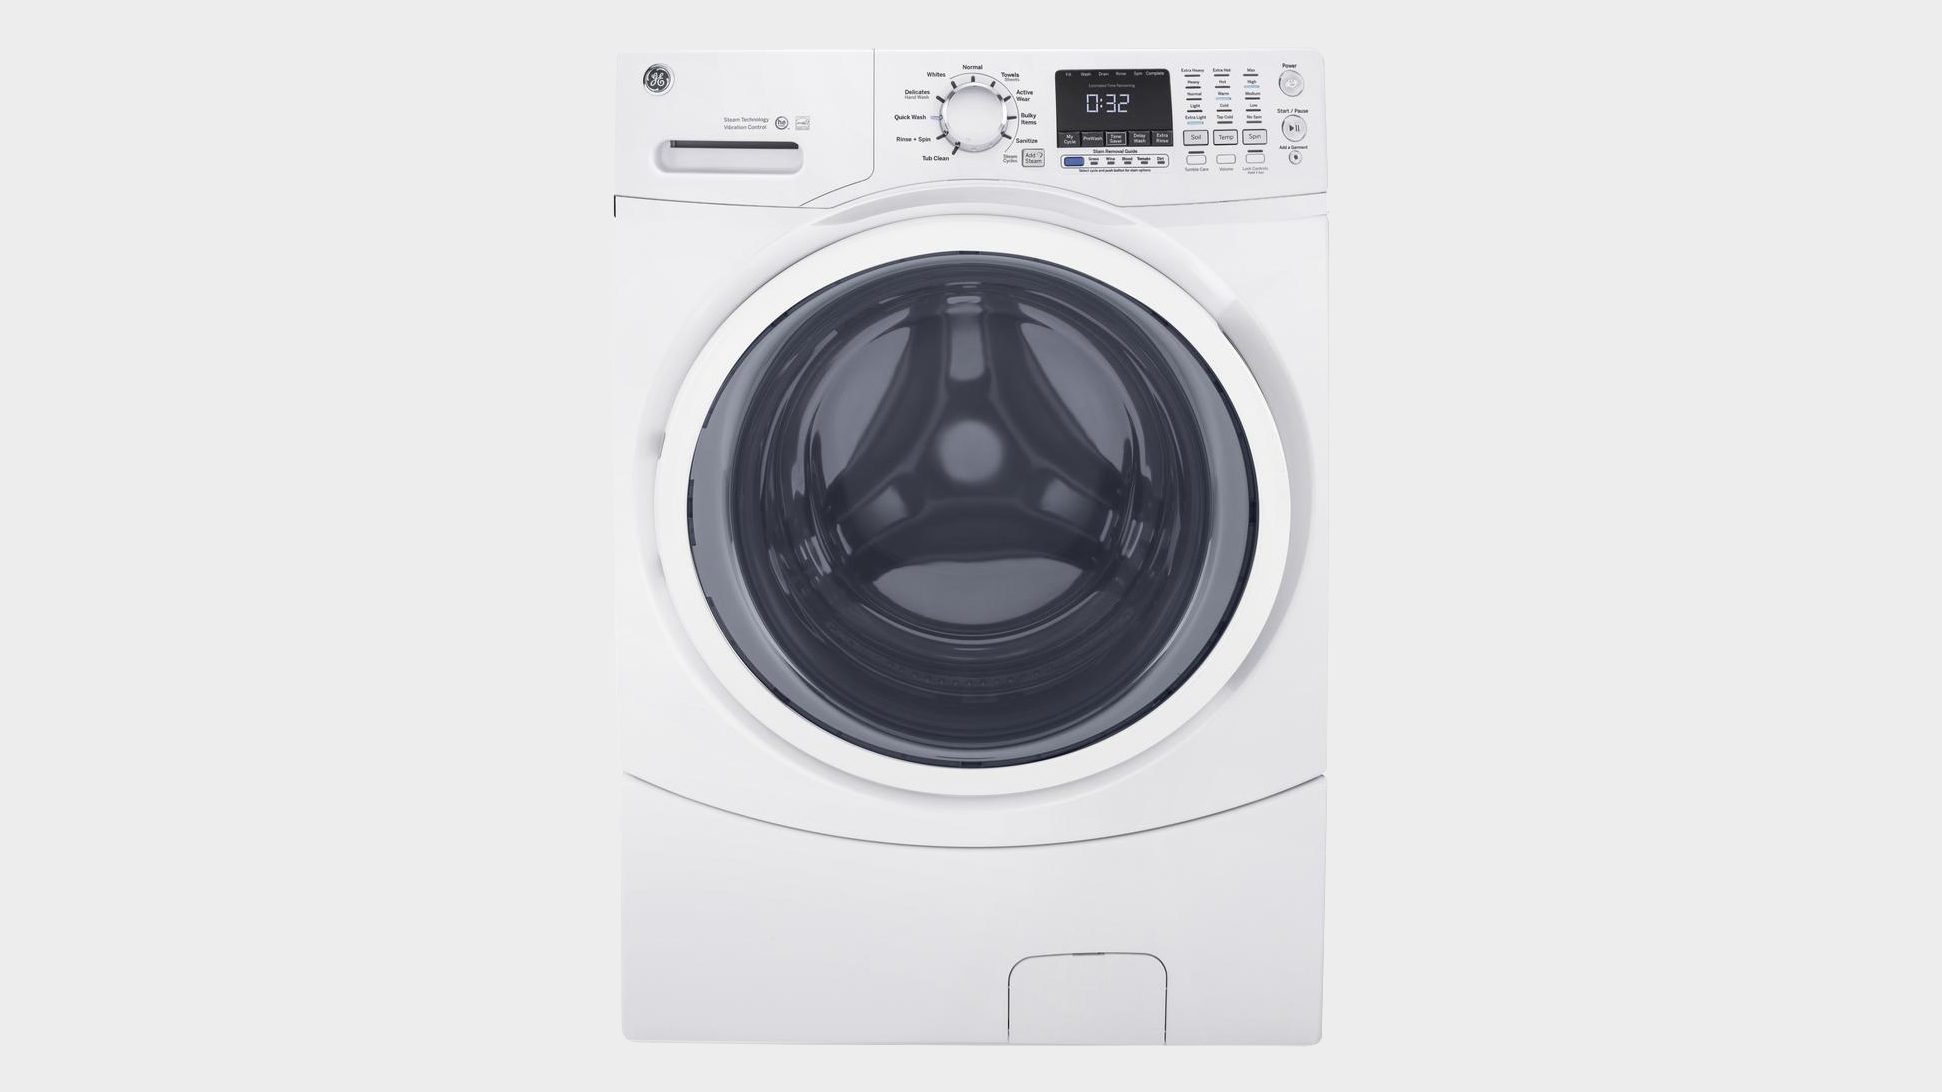 Best front load washers: GE GFW450SSMWW Front Load Washer Review